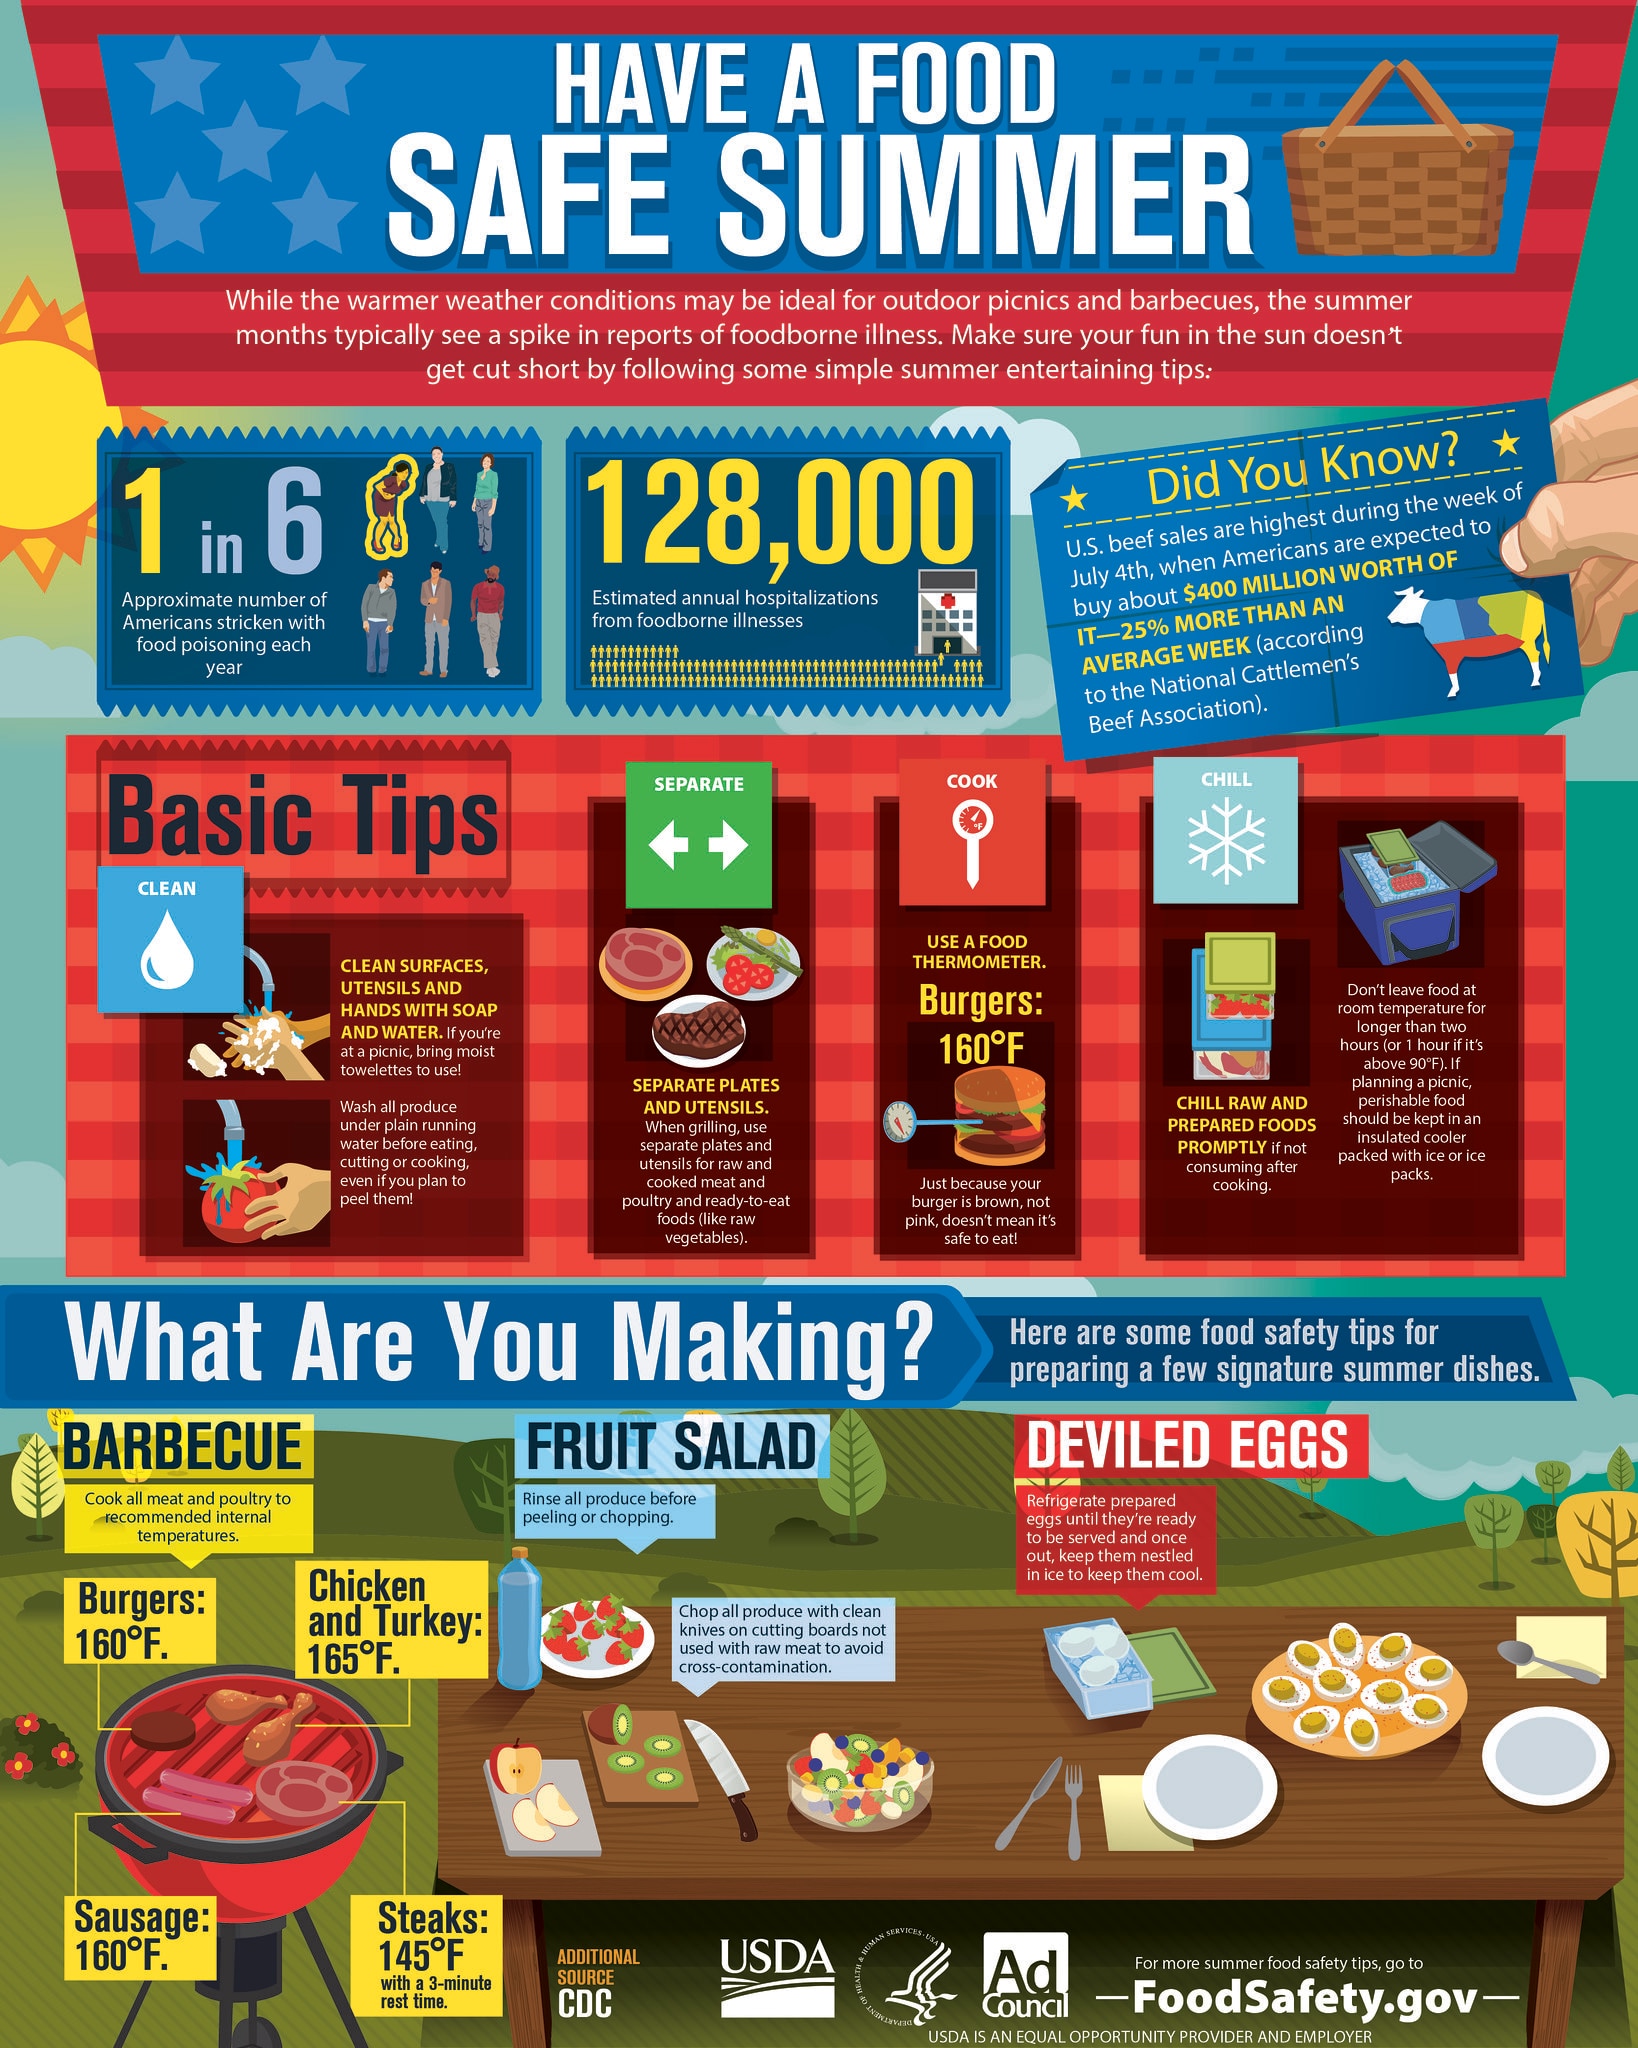 Infographic from FoodSafety.gov with tips for a food-safe summer and safely preparing signature summer dishes.